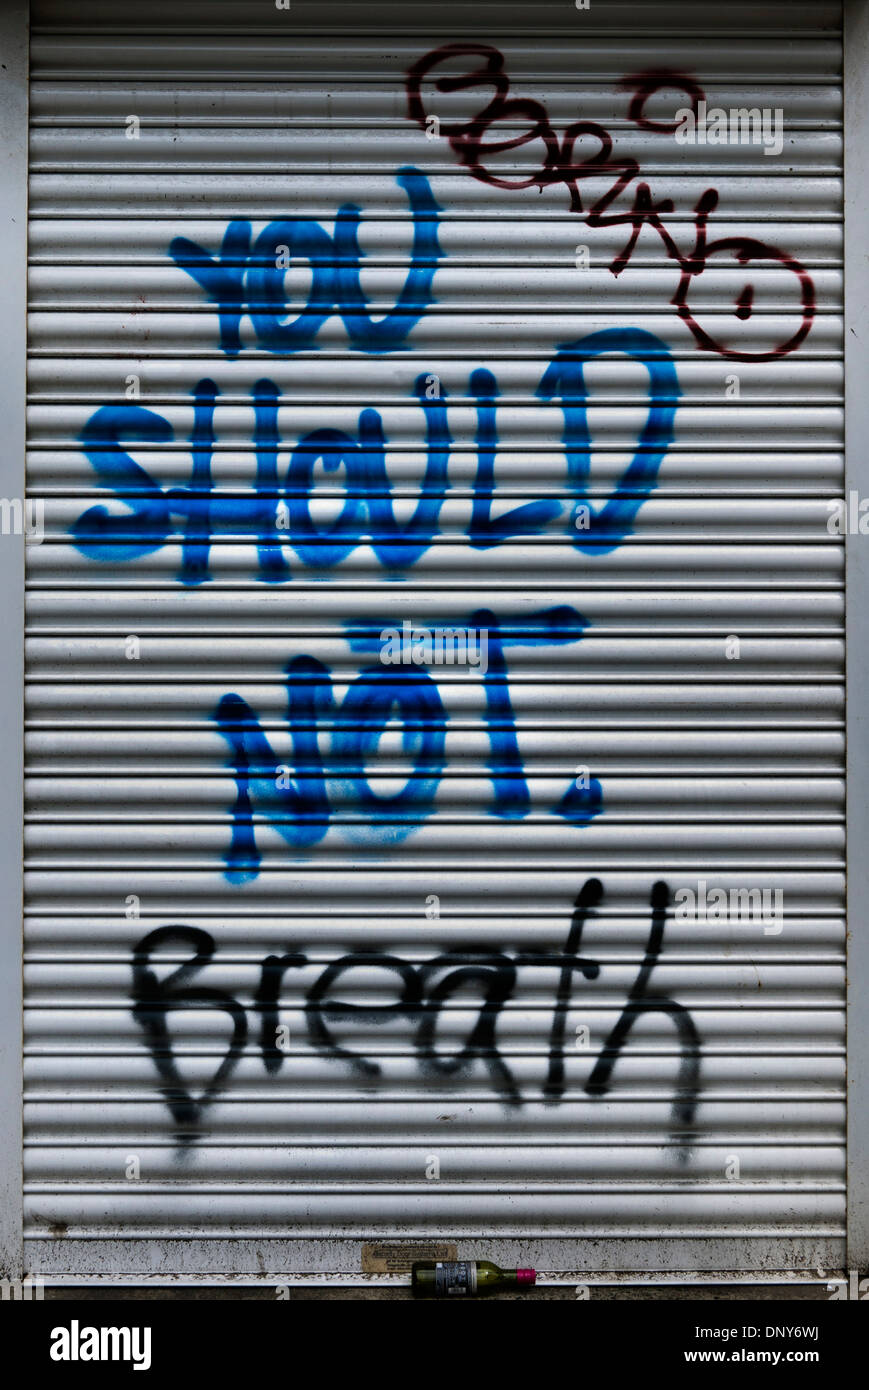 Graffiti 'You Should Not Breath' sprayed on roller blinds in London, UK Stock Photo